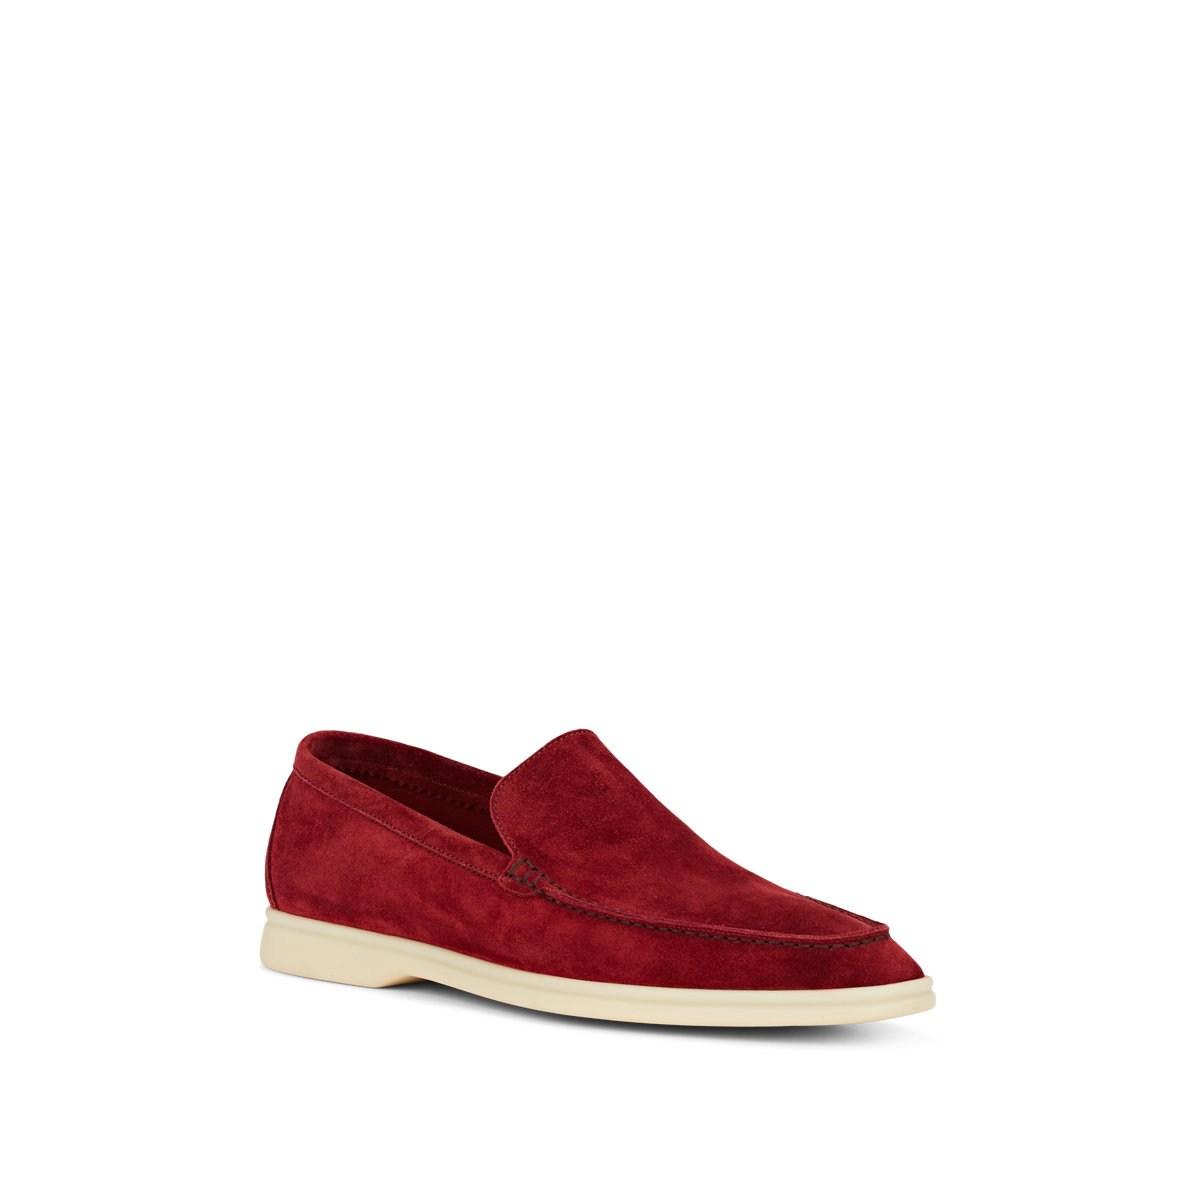 Loro Piana Summer Walk Suede Loafers in Red for Men - Lyst